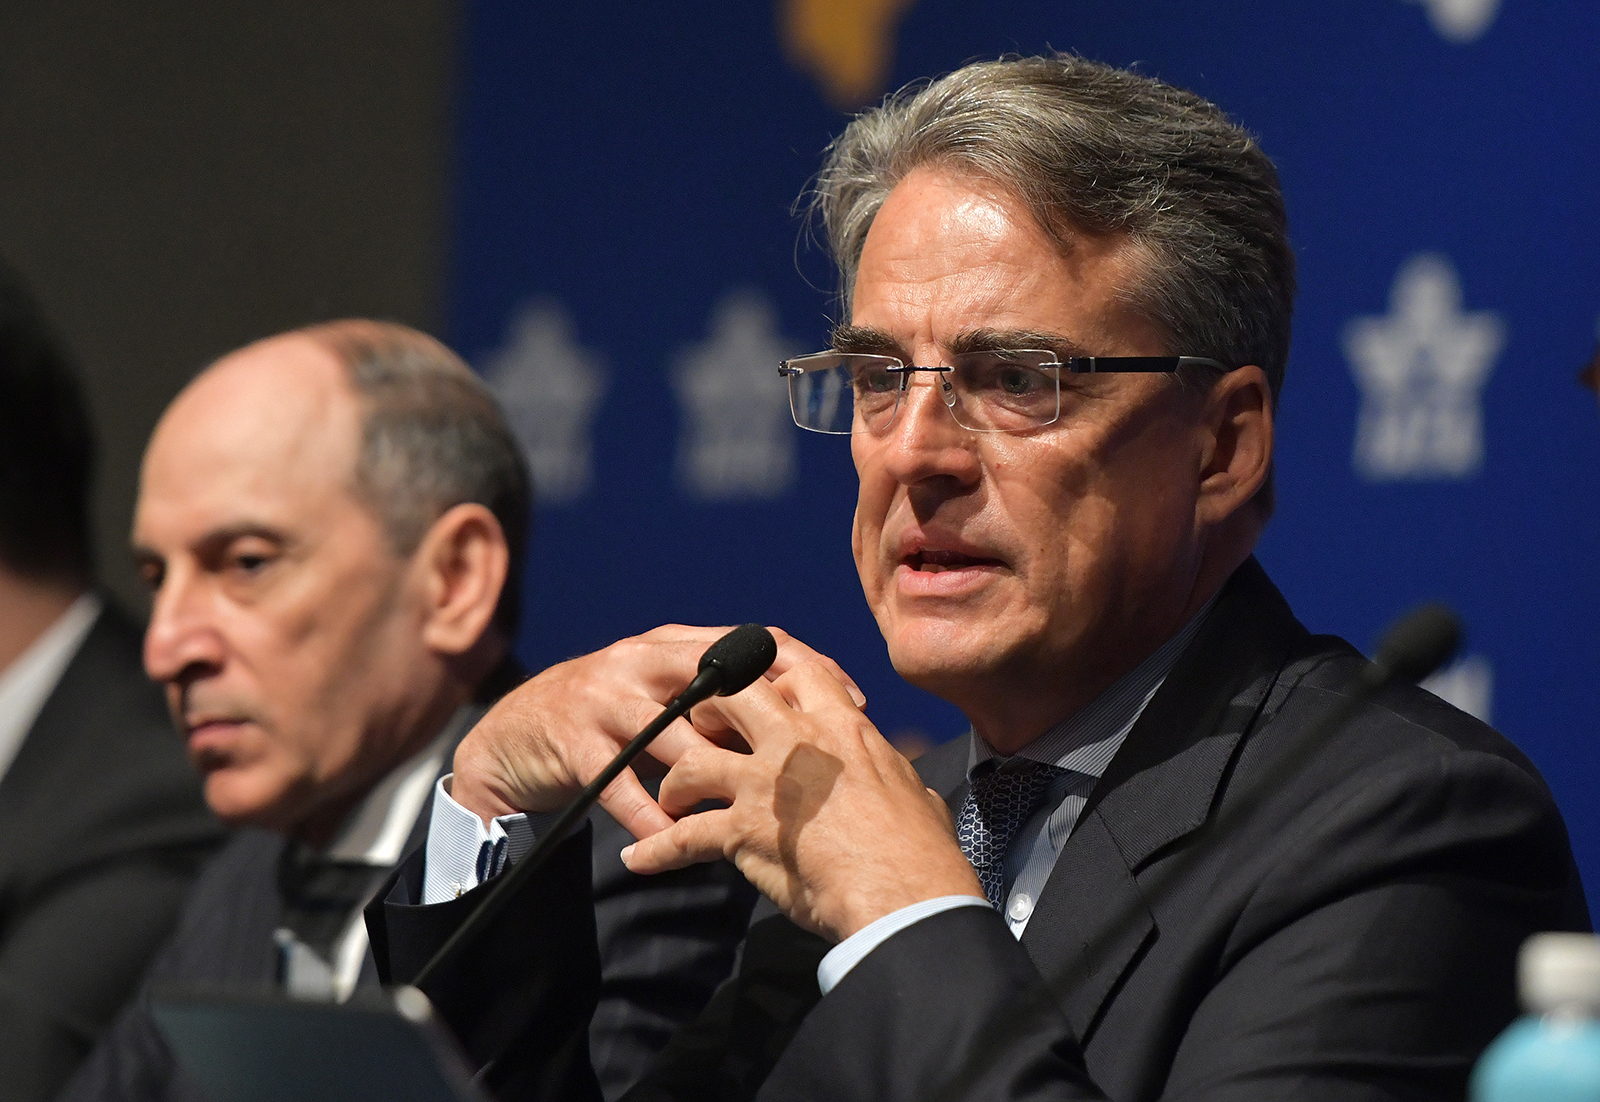 International Air Transport Association (IATA) chief executive Alexandre de Juniac speaks during a press conference after the opening session of the annual general meeting of IATA in Seoul on June 2, 2019.